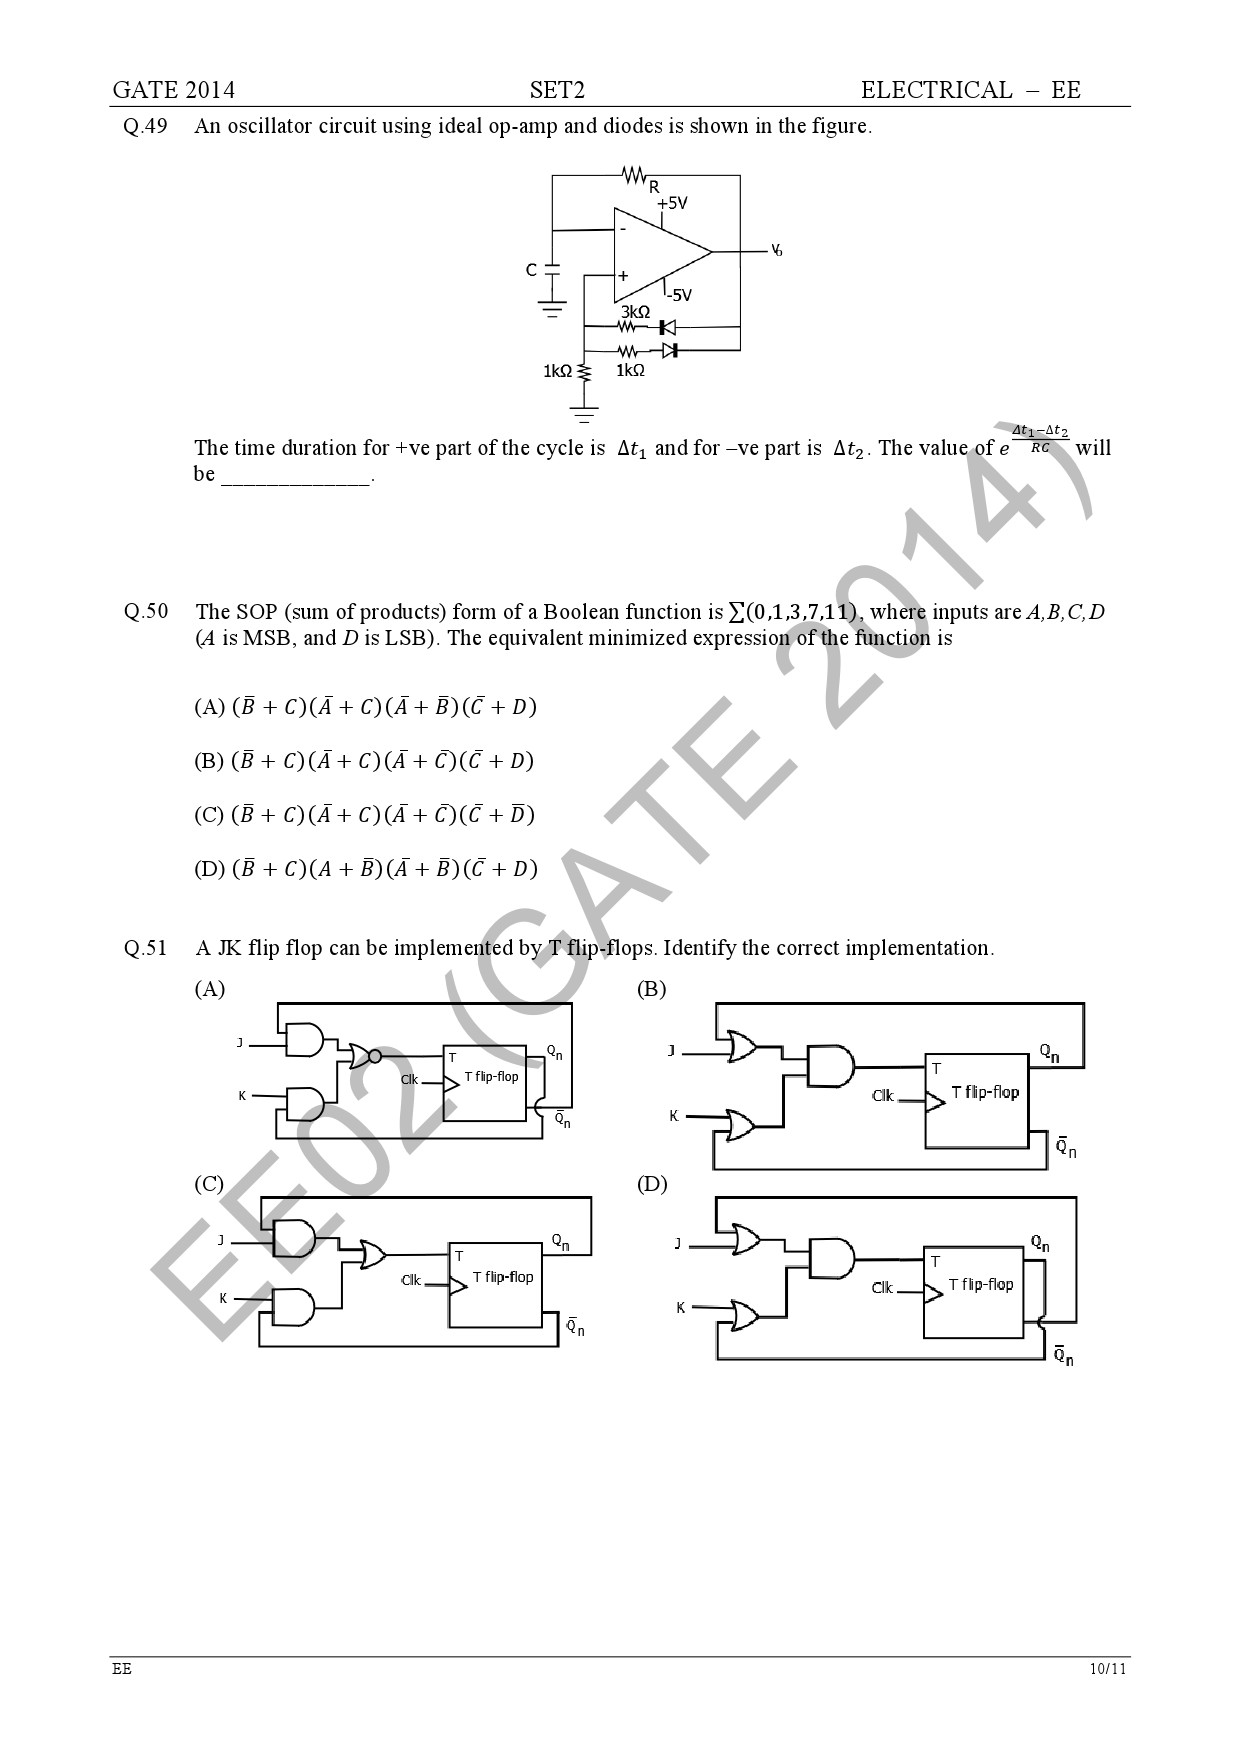 GATE Exam Question Paper 2014 Electrical Engineering Set 2 16